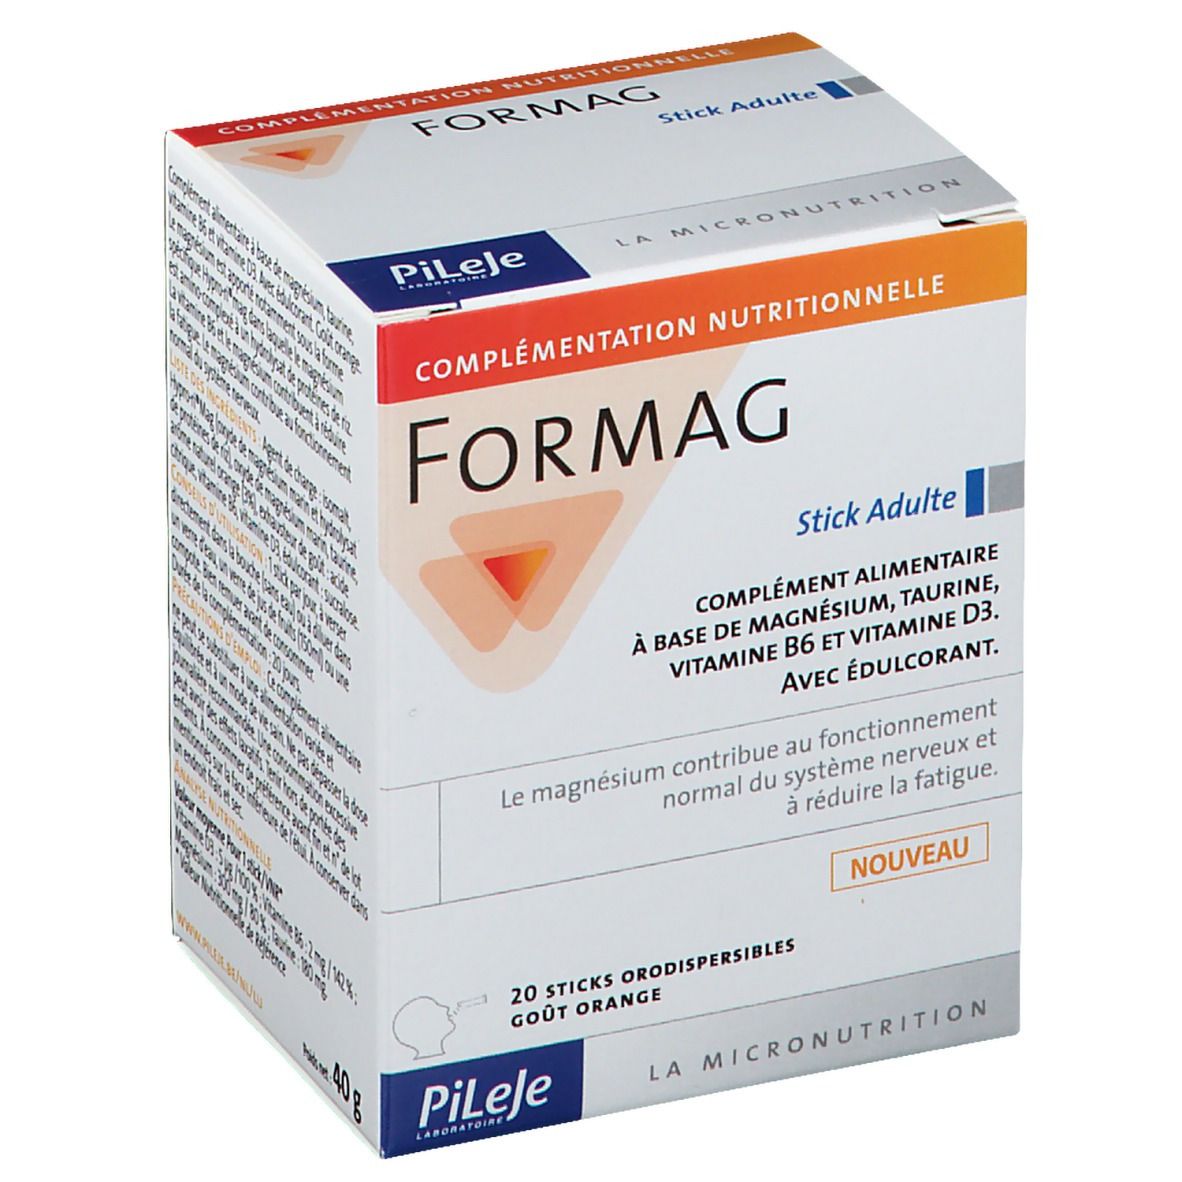 Formag Stick Adulte